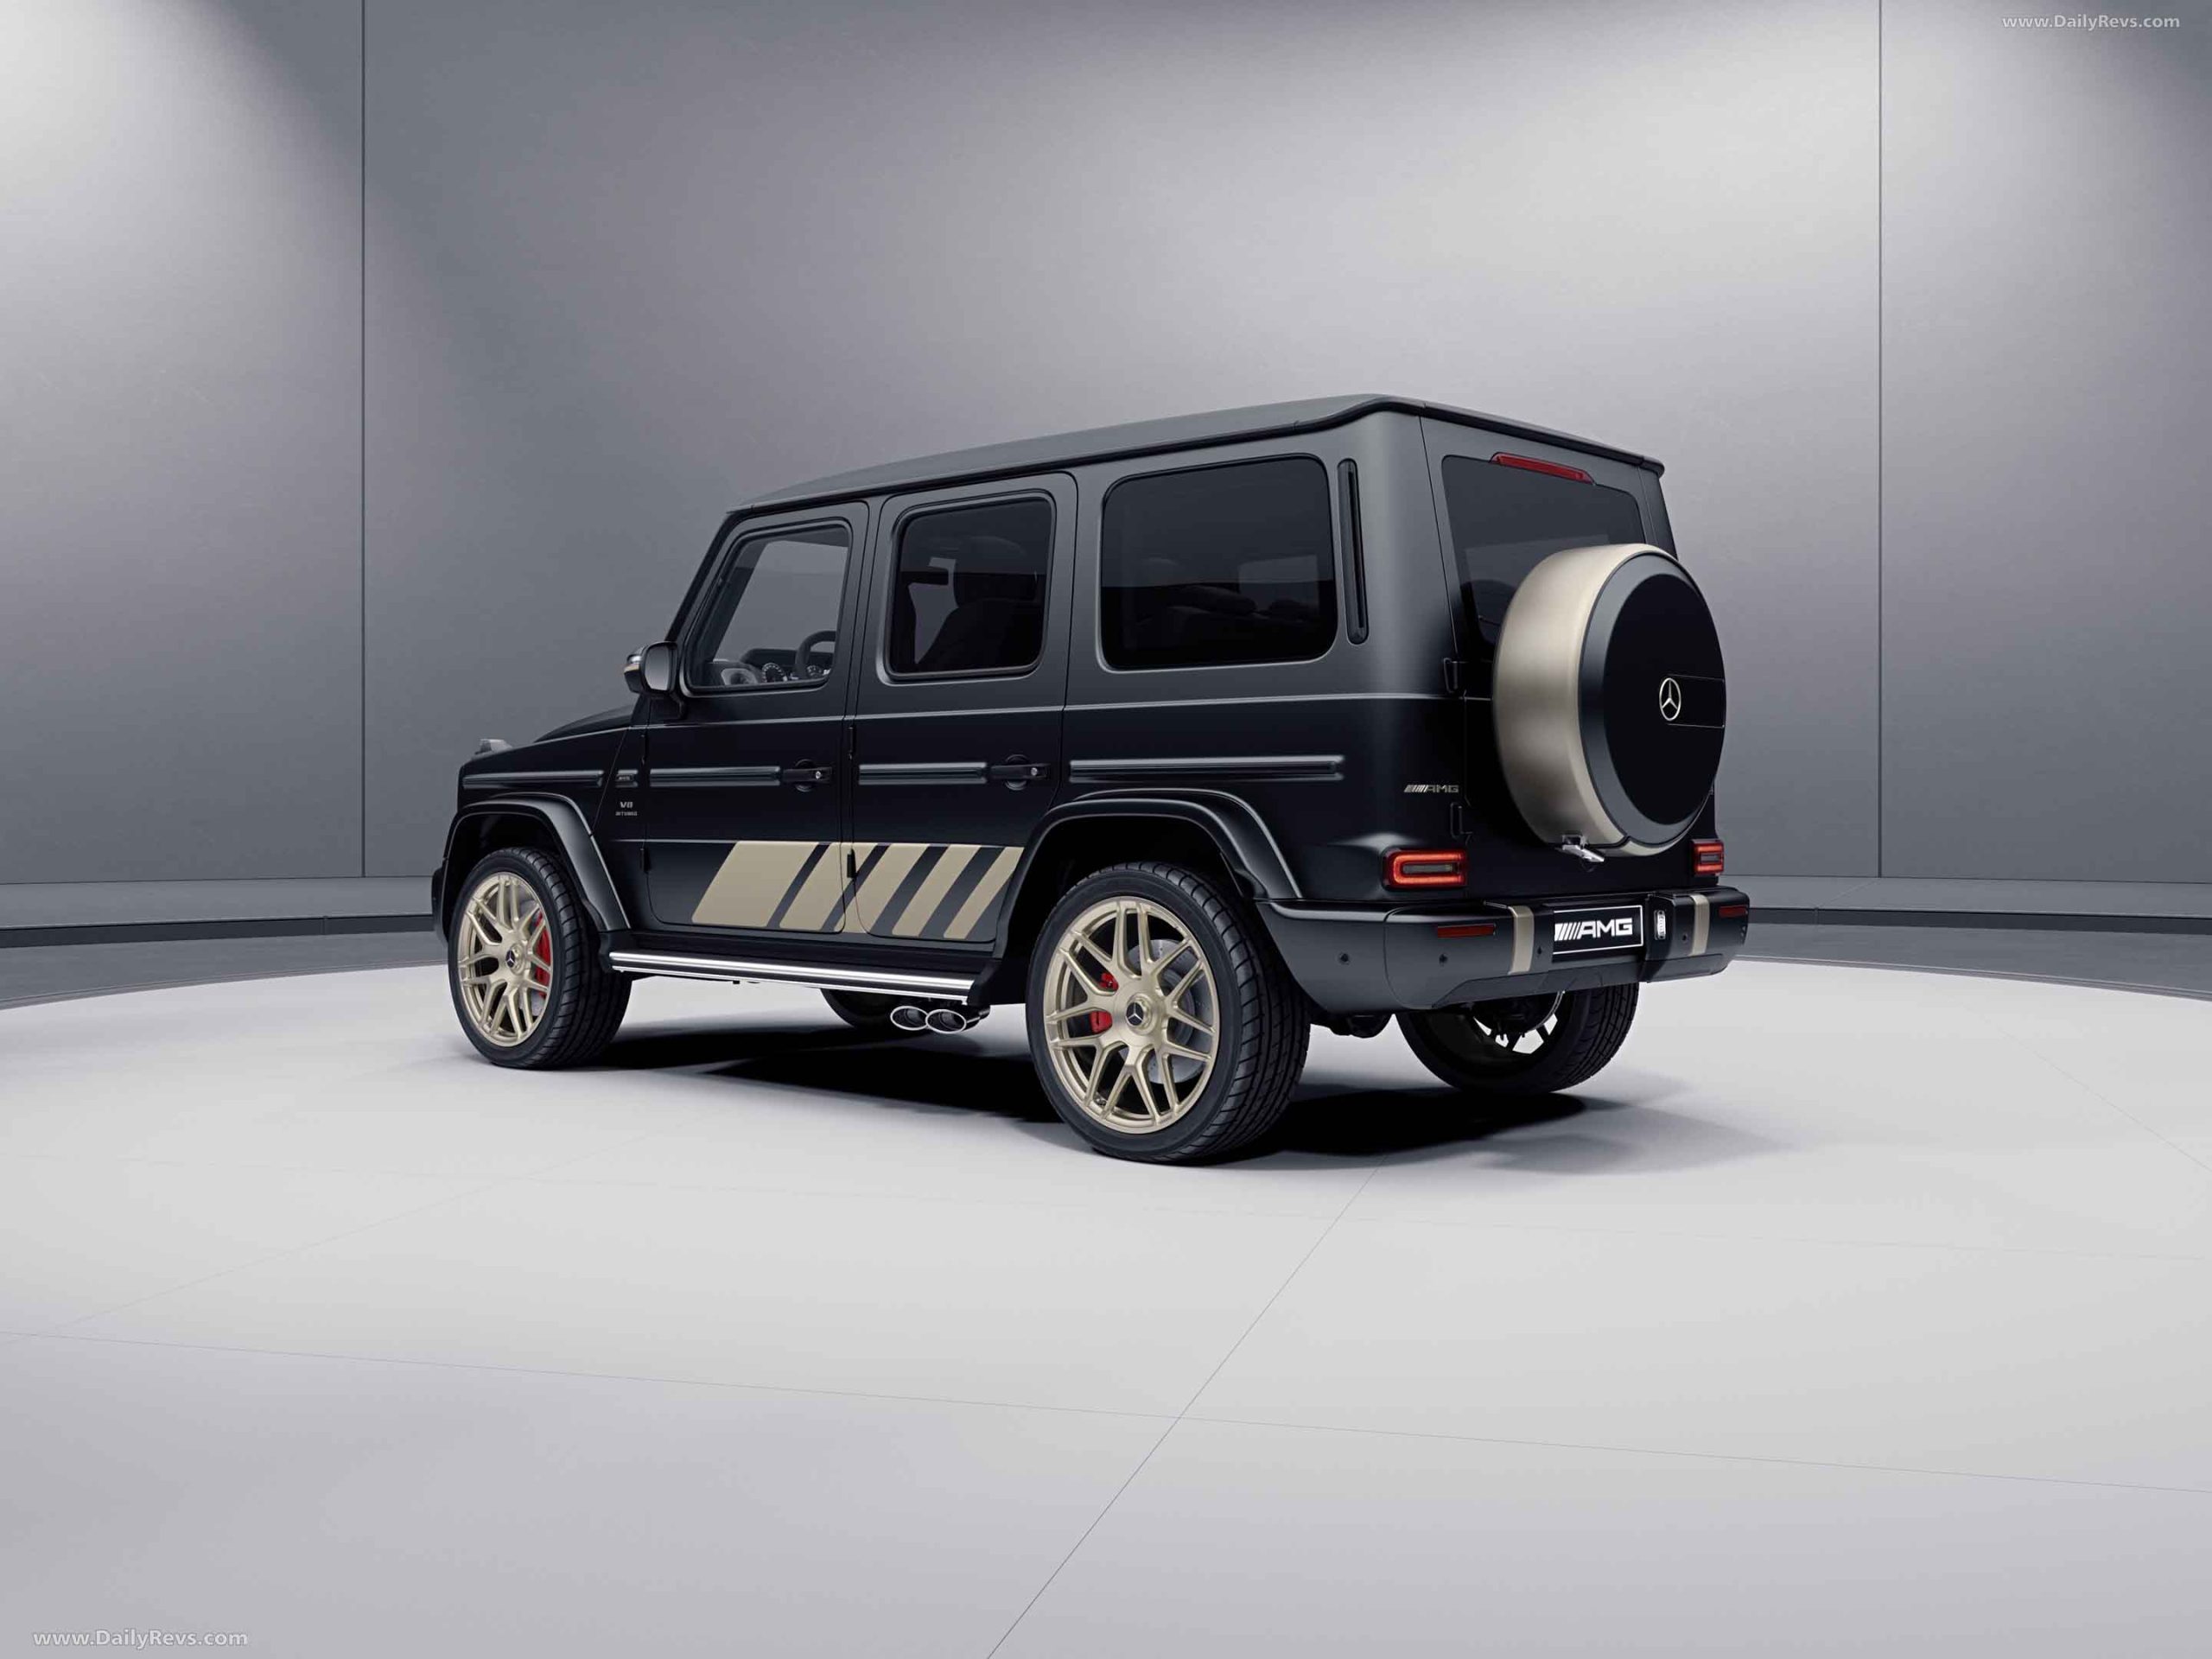 Introducing the Mercedes-AMG G 63 “Grand Edition”